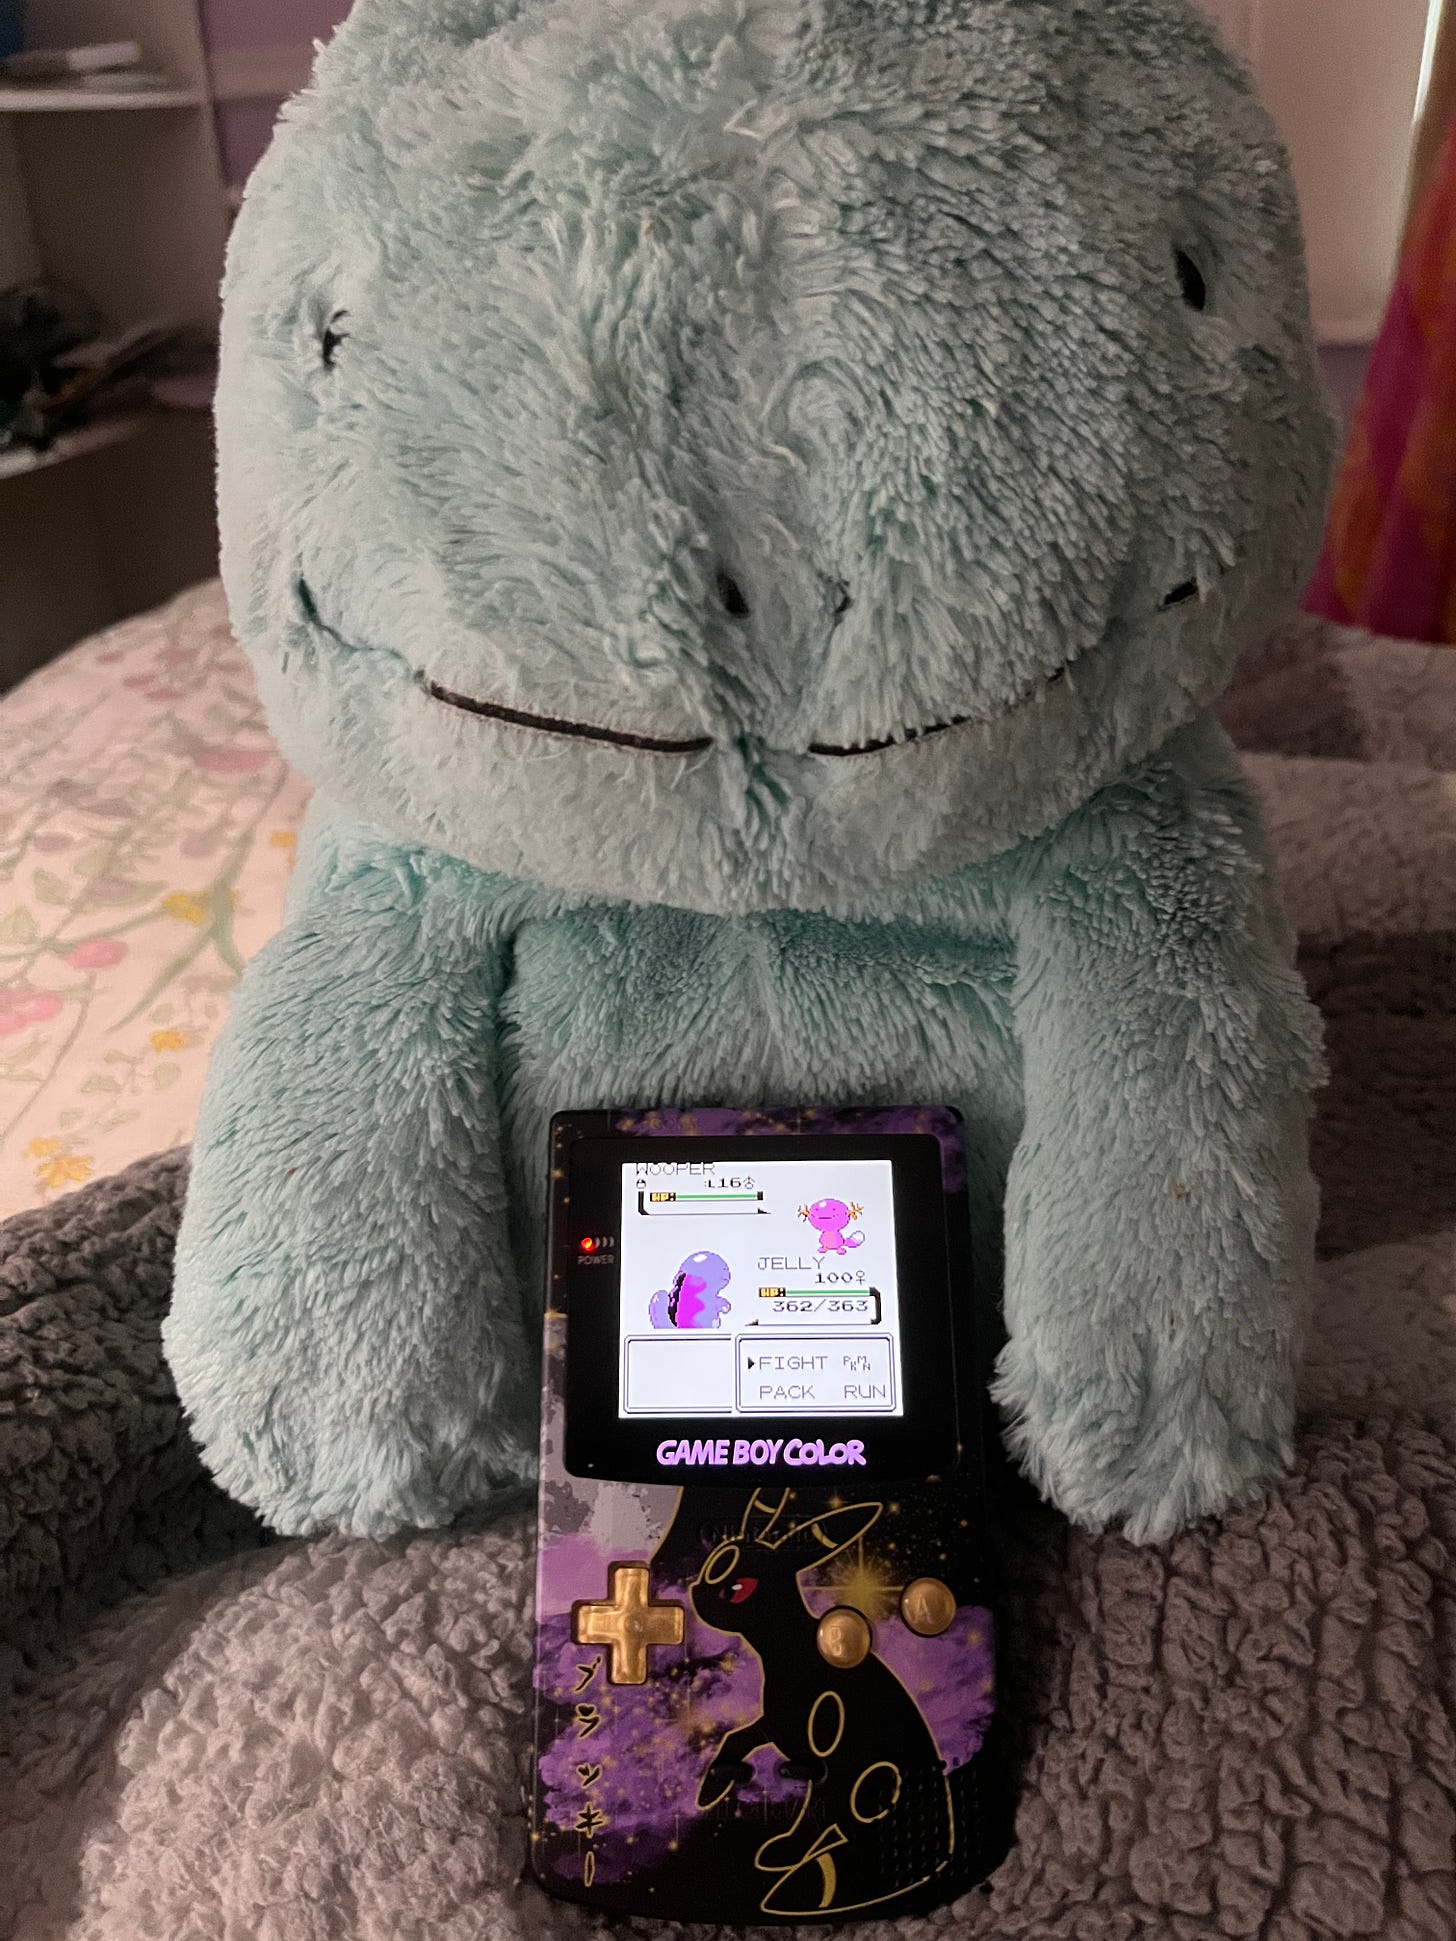 Ayano's favourite Pokémon is Quagsire, and she has a well loved plush of one called Jelly! Also pictured is a custom Game Boy Color with backlight, featuring Umbreon on the shell